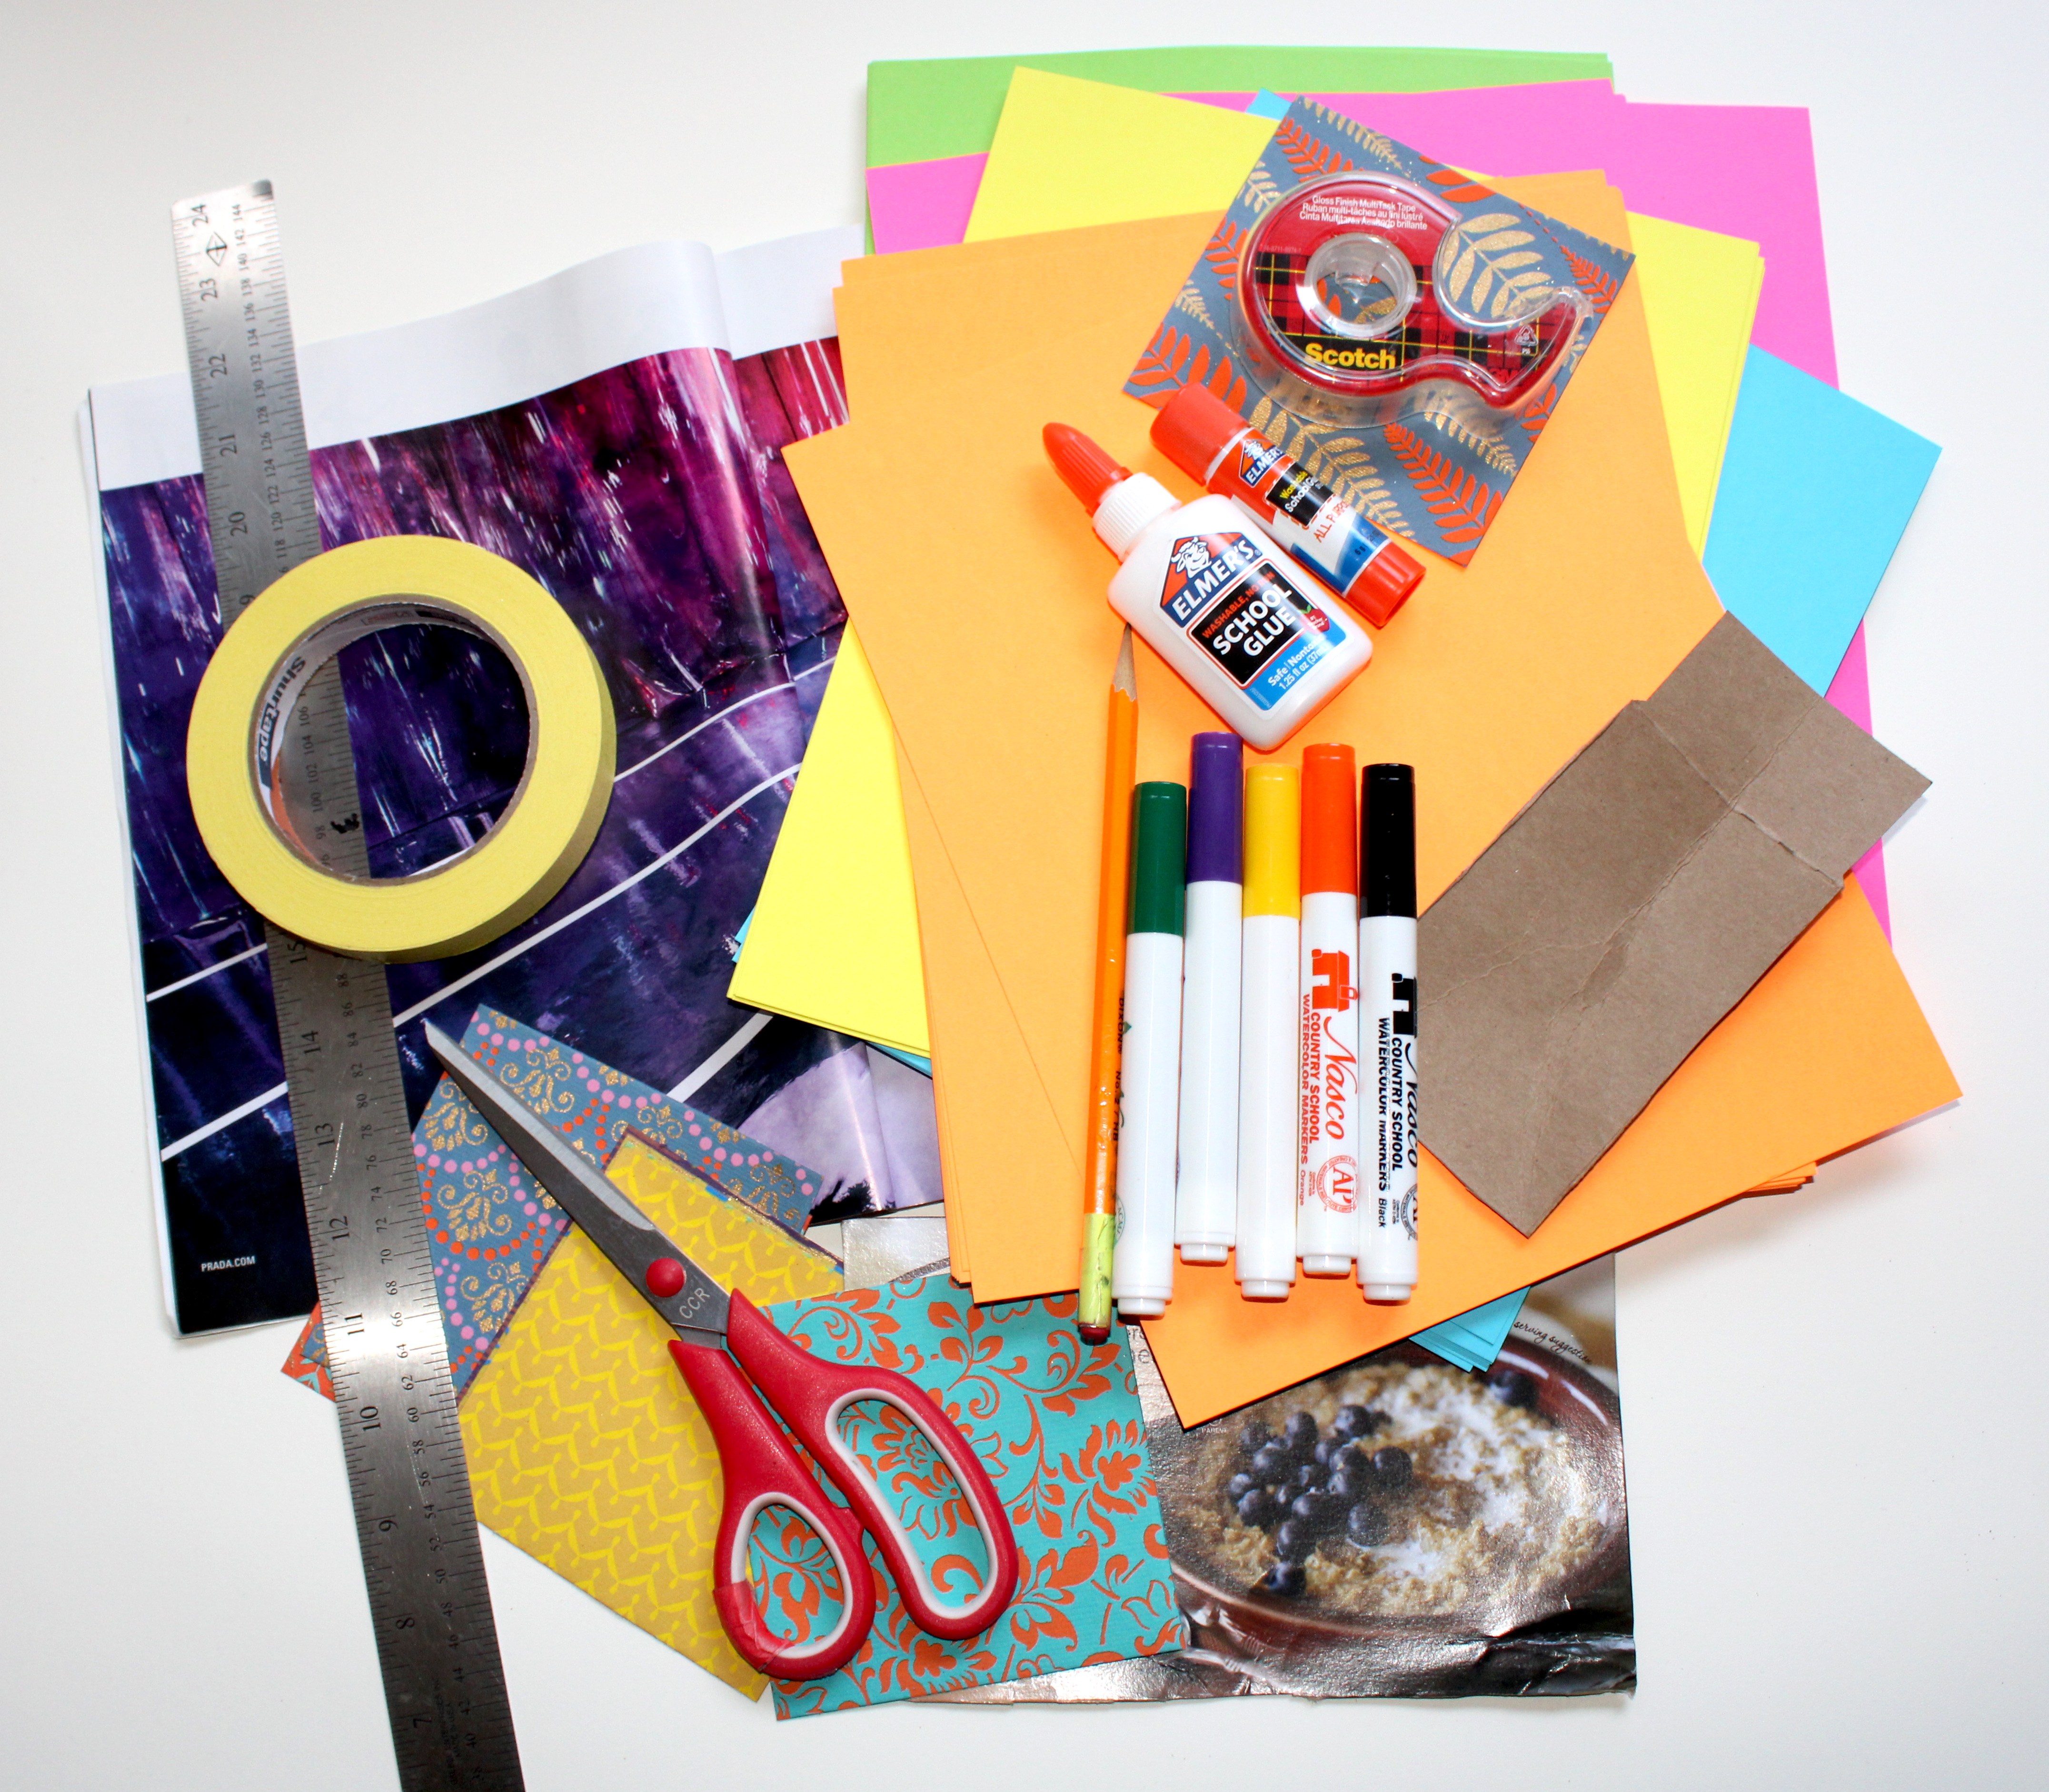 Invite your art mate to help you scavenge around the house to collect cool papers to work with!